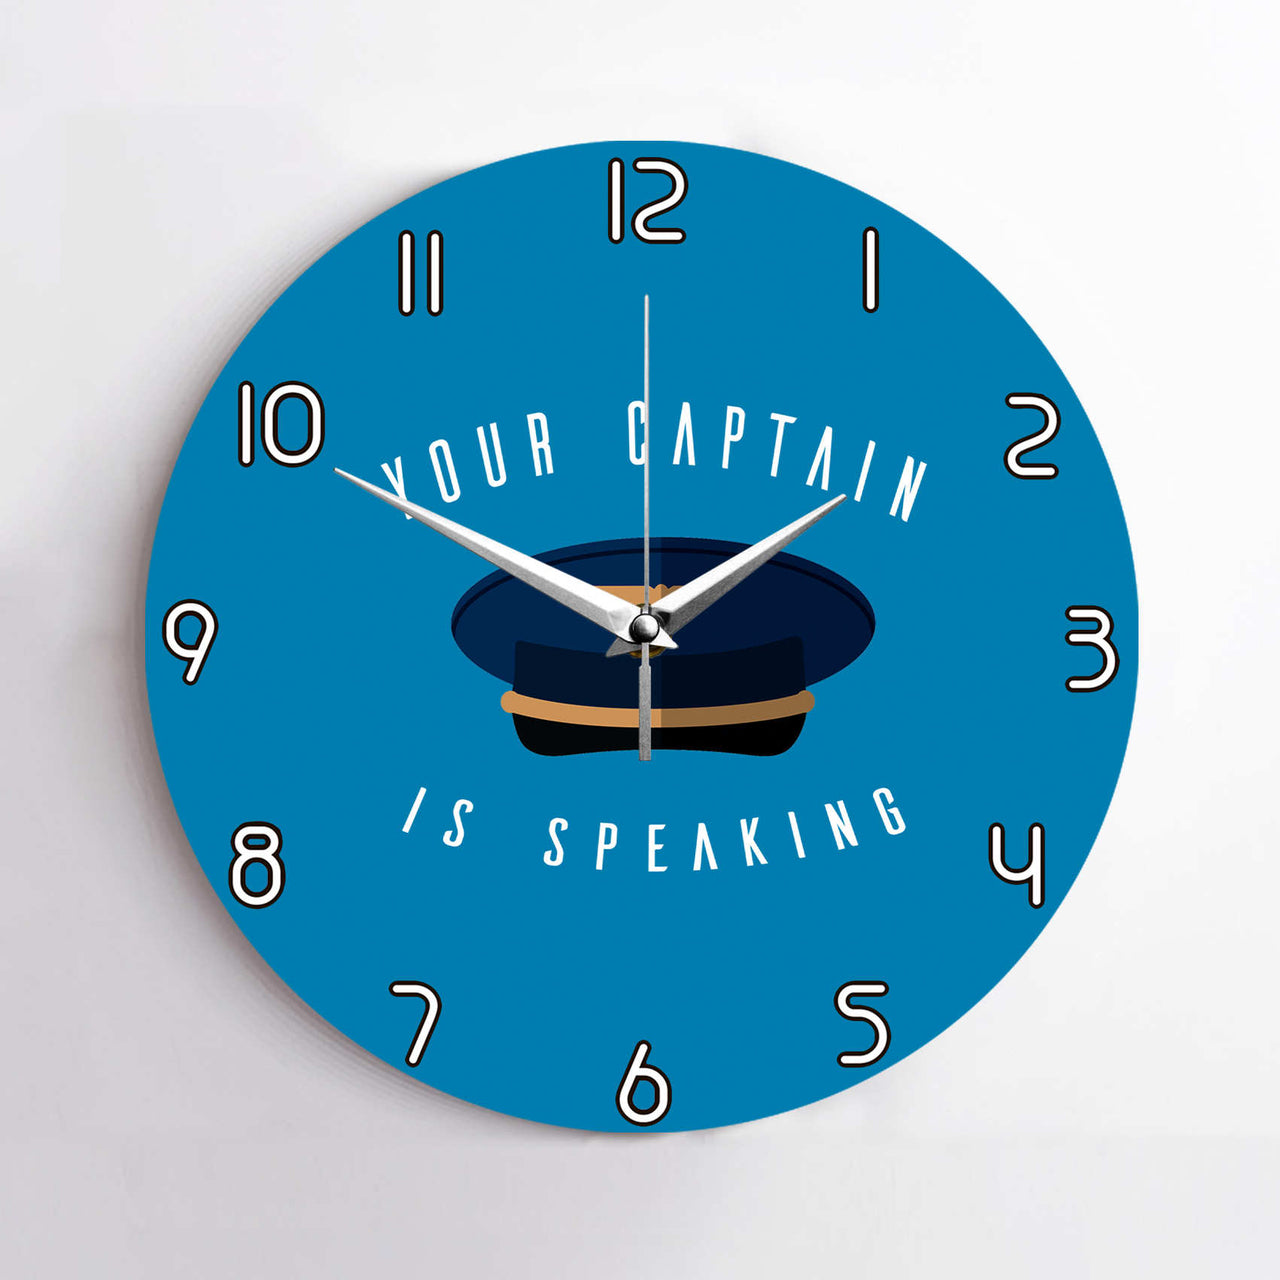 Your Captain Is Speaking Designed Wall Clocks